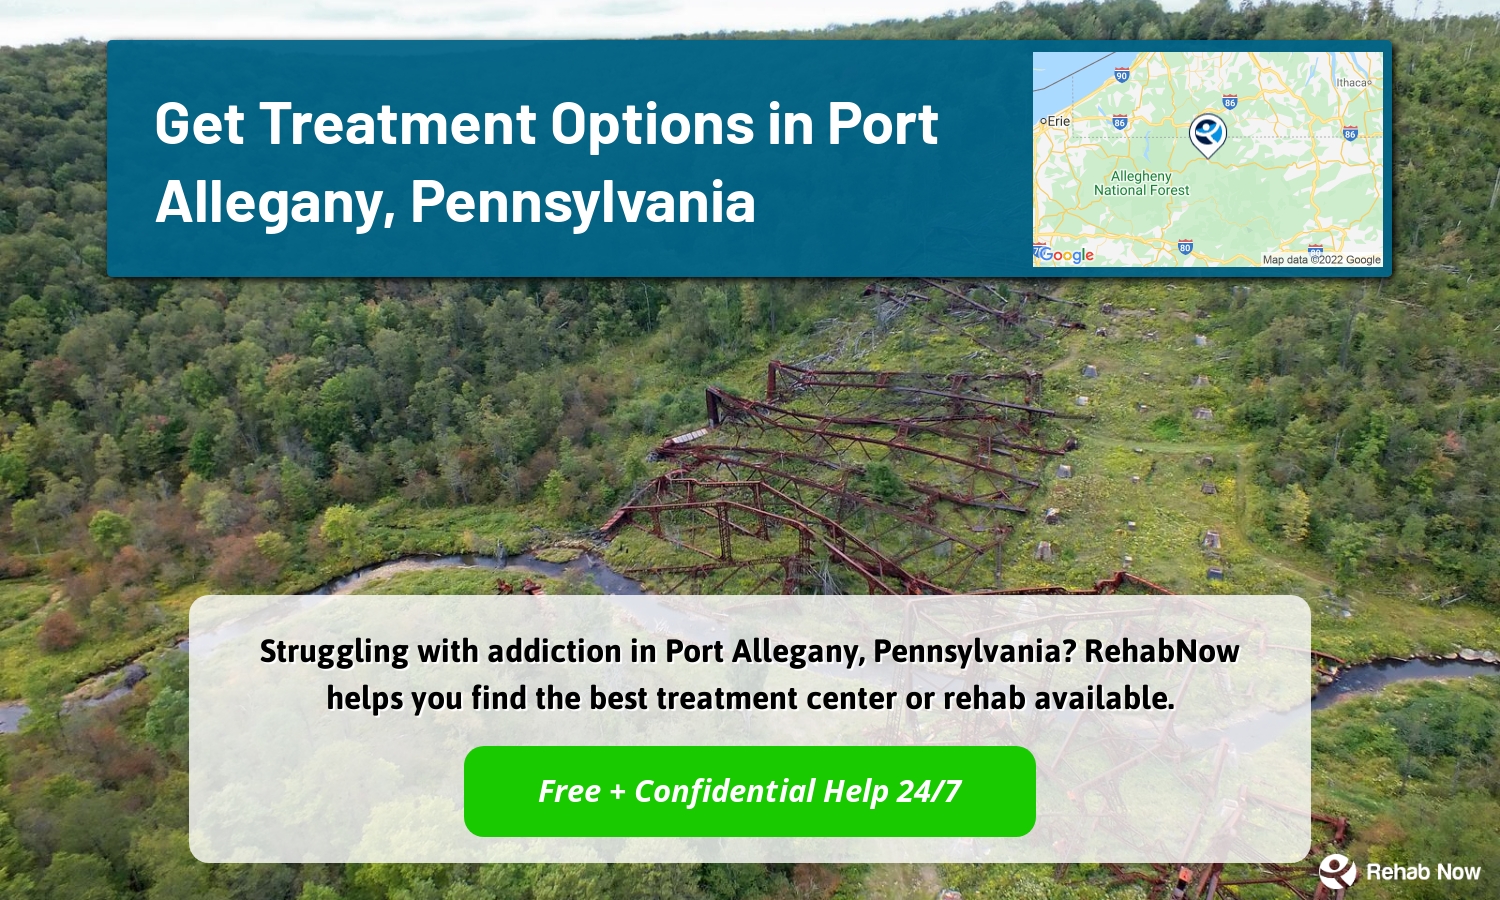 Struggling with addiction in Port Allegany, Pennsylvania? RehabNow helps you find the best treatment center or rehab available.